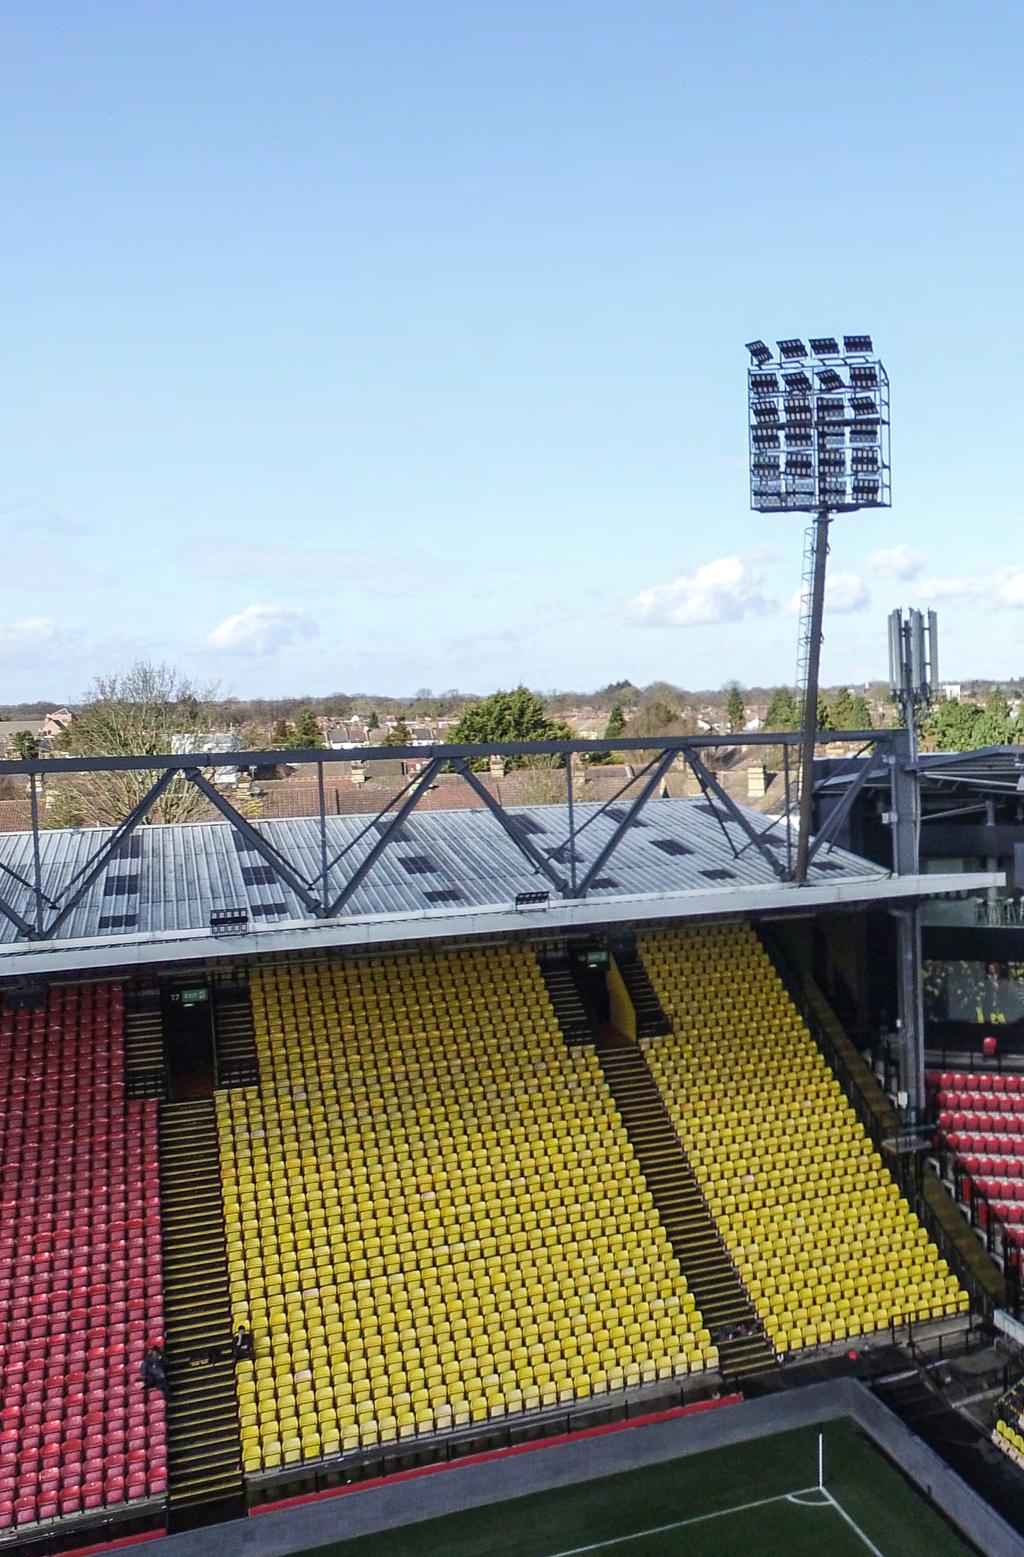 WELCOME TO VICARAGE ROAD THE HOME OF WATFORD FOOTBALL CLUB Thank you for choosing to come and watch your team at Watford FC.